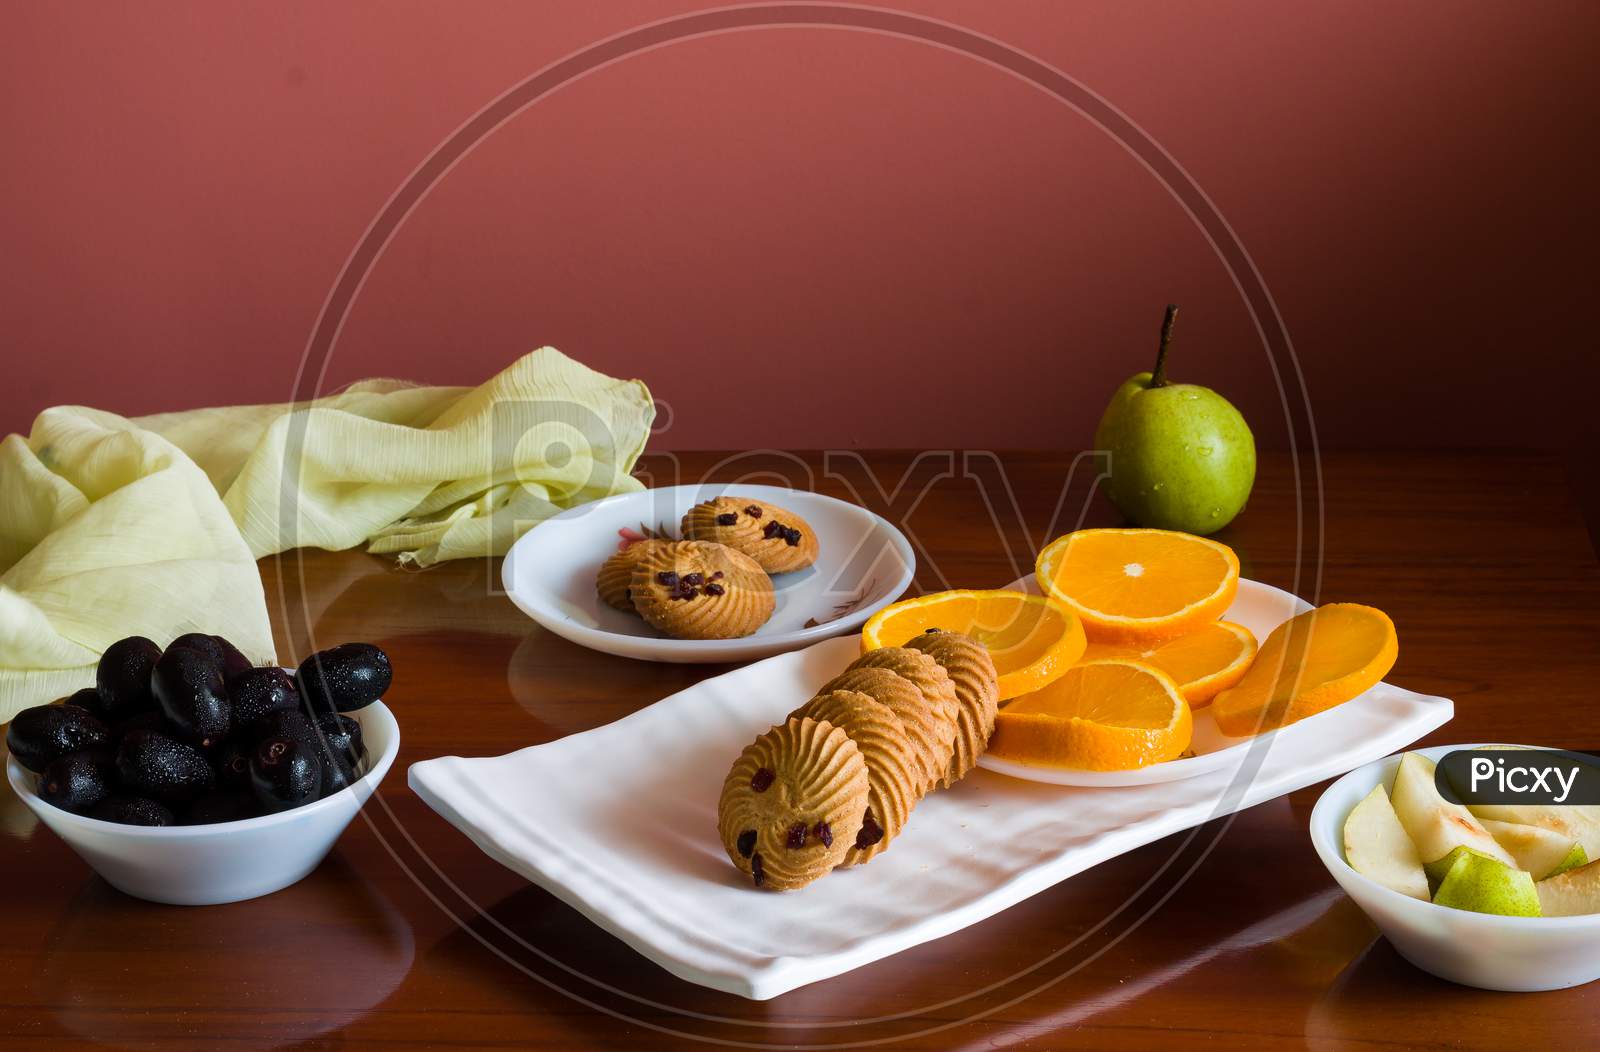 Front view of fruit platter with mix of fresh,juicy,sweet orange slices,pears,jamun or java plum berries and healthy oat cookies,on dark wooden background.